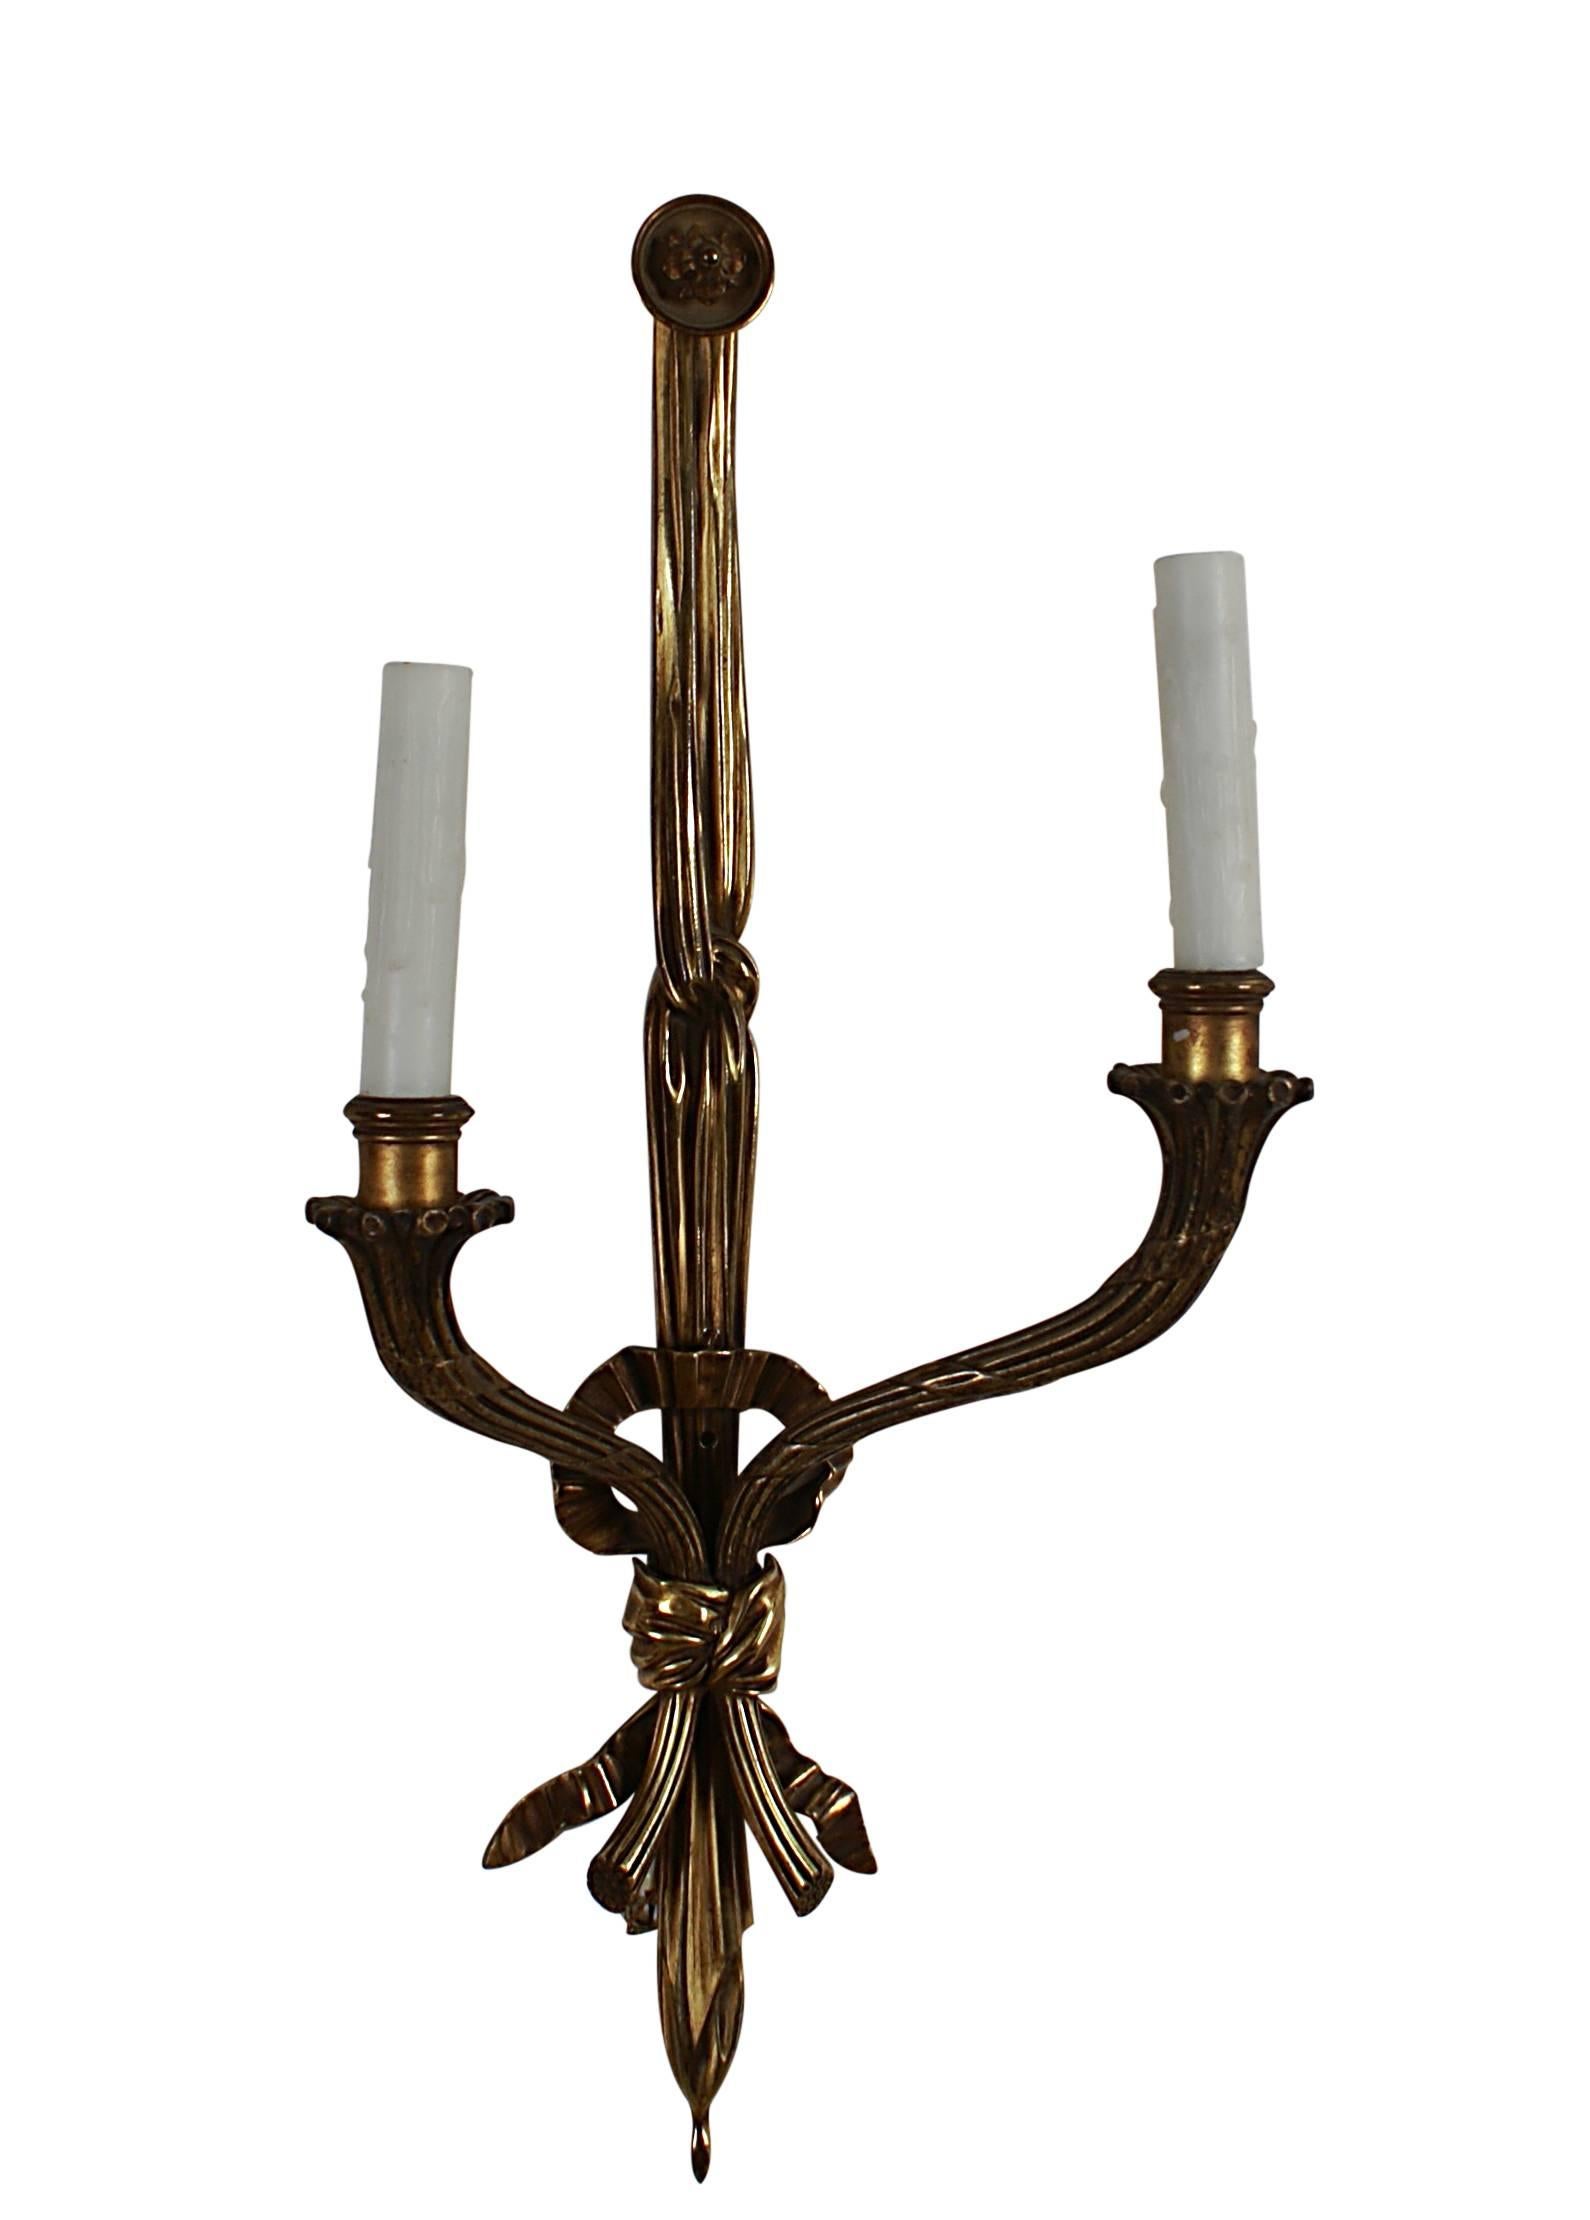 Late 19th Century French Louis XVI Style Gilt Bronze Sconces Wired for Lighting, circa 1870